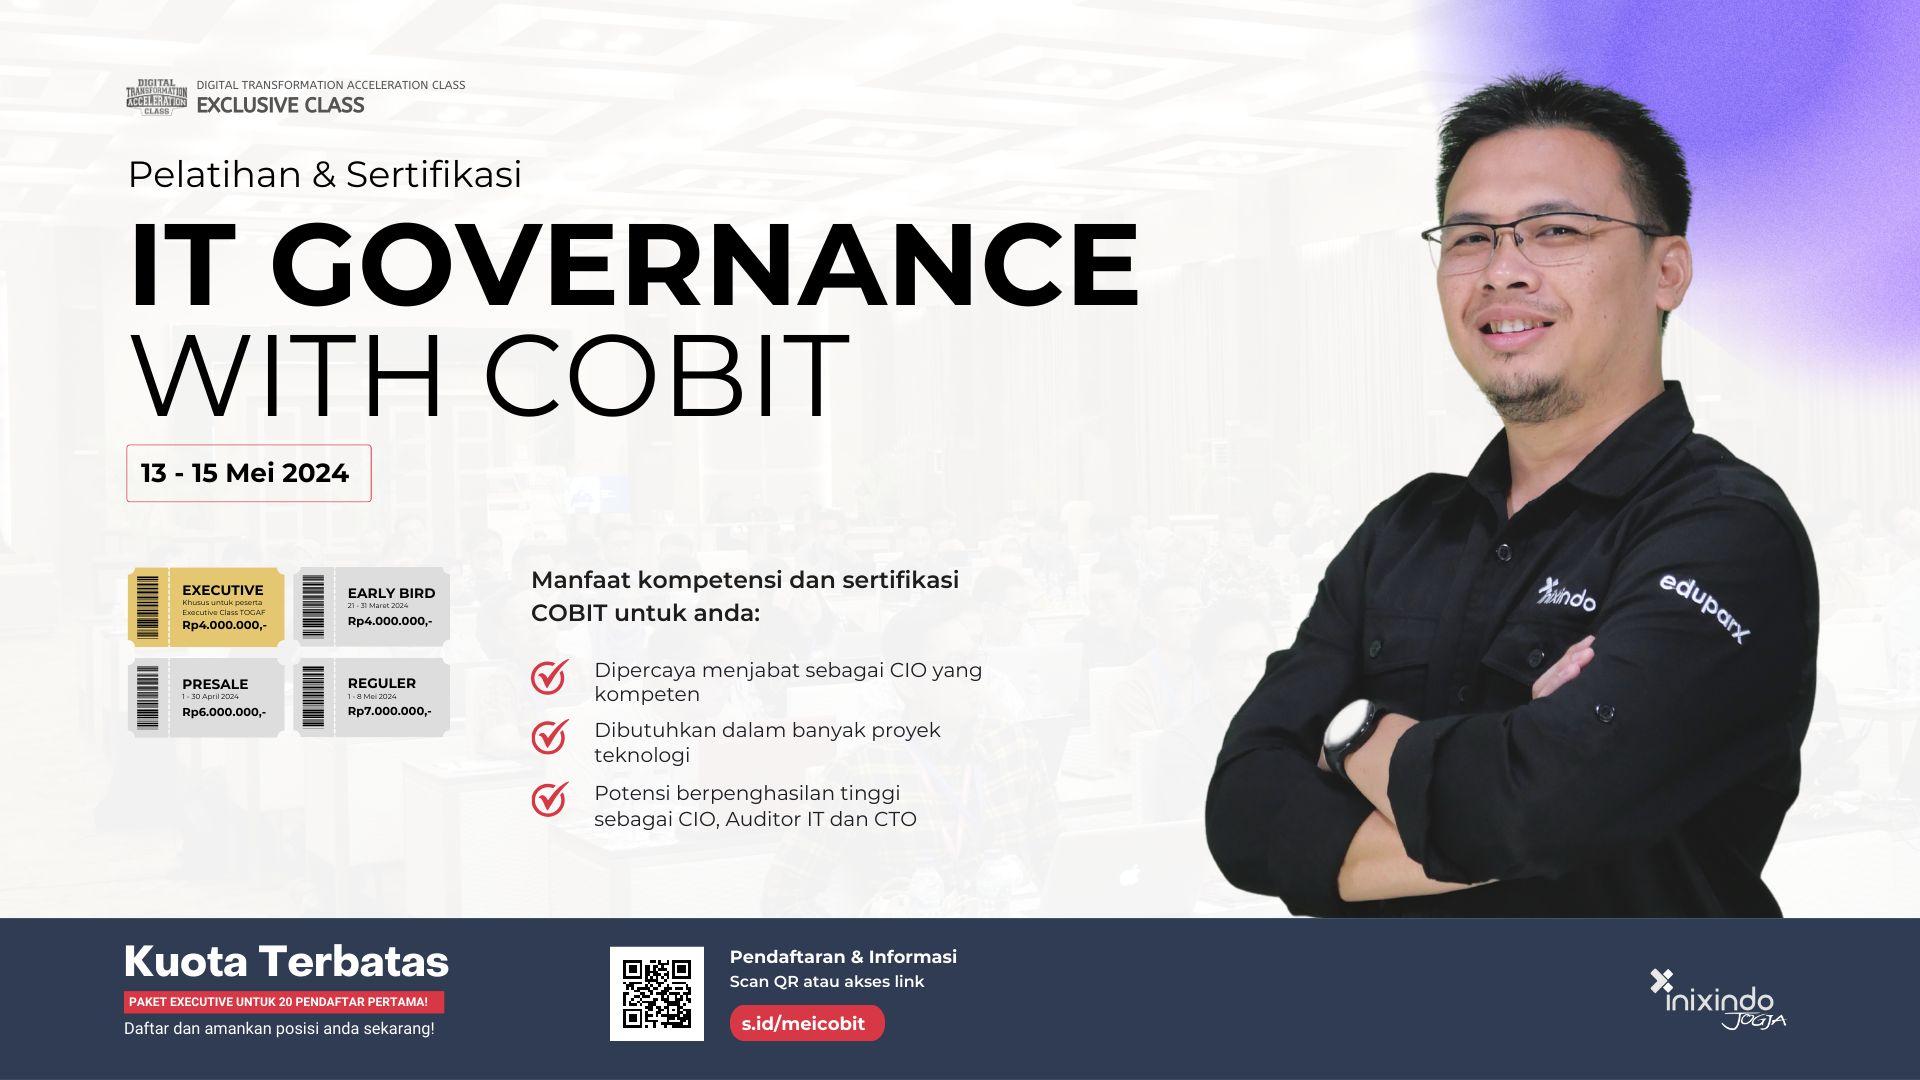 IT Governance with COBIT 2019 10